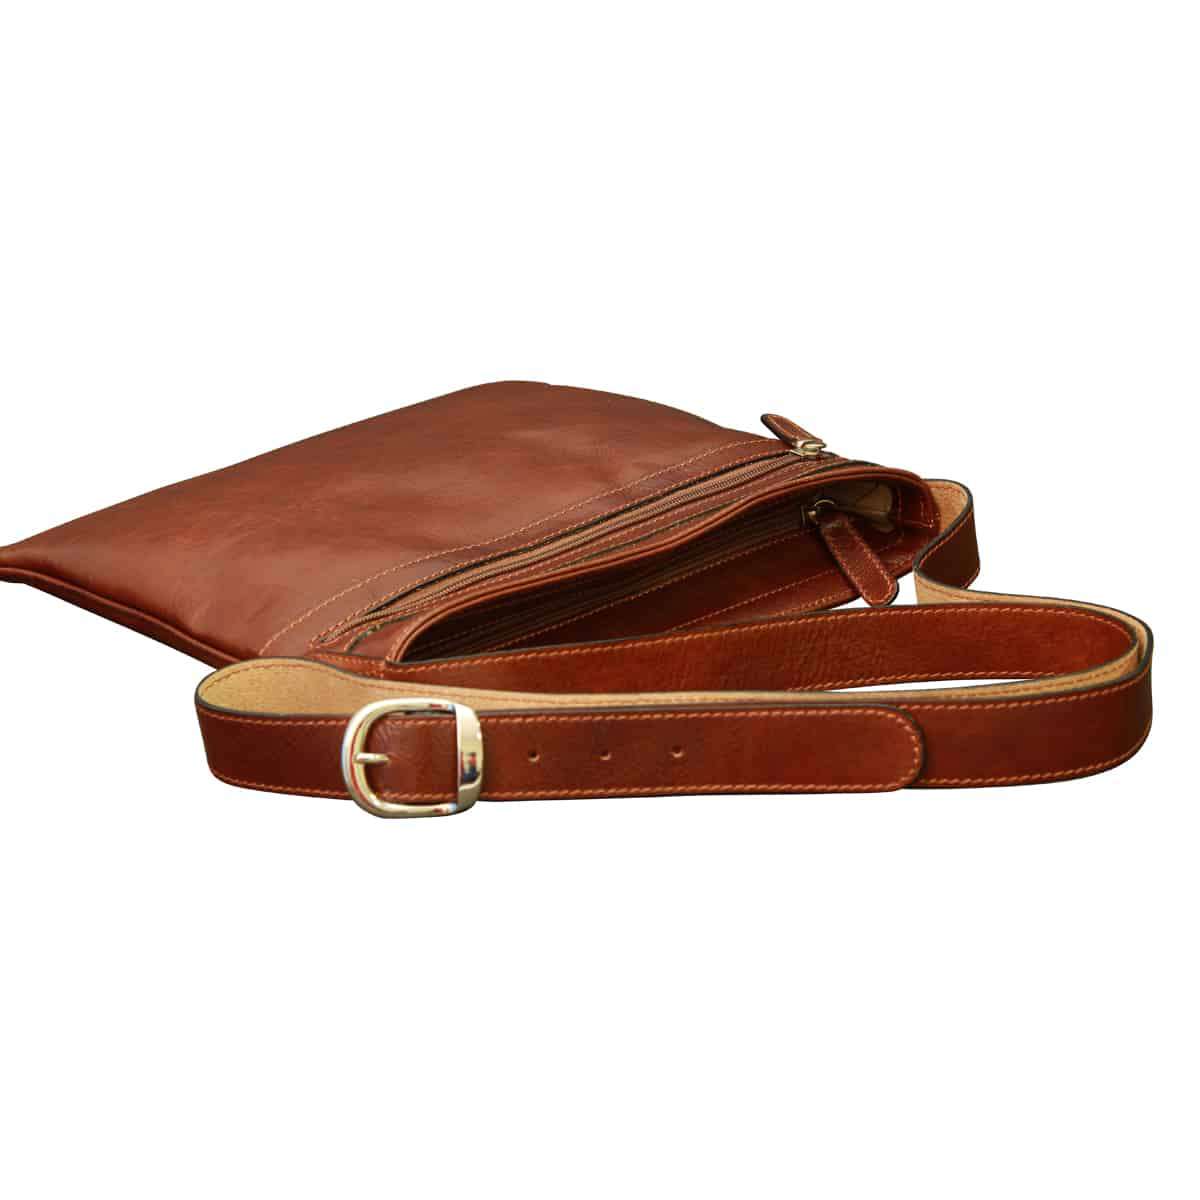 Leather Cross Body Bag - Brown | 069705MA UK | Old Angler Firenze